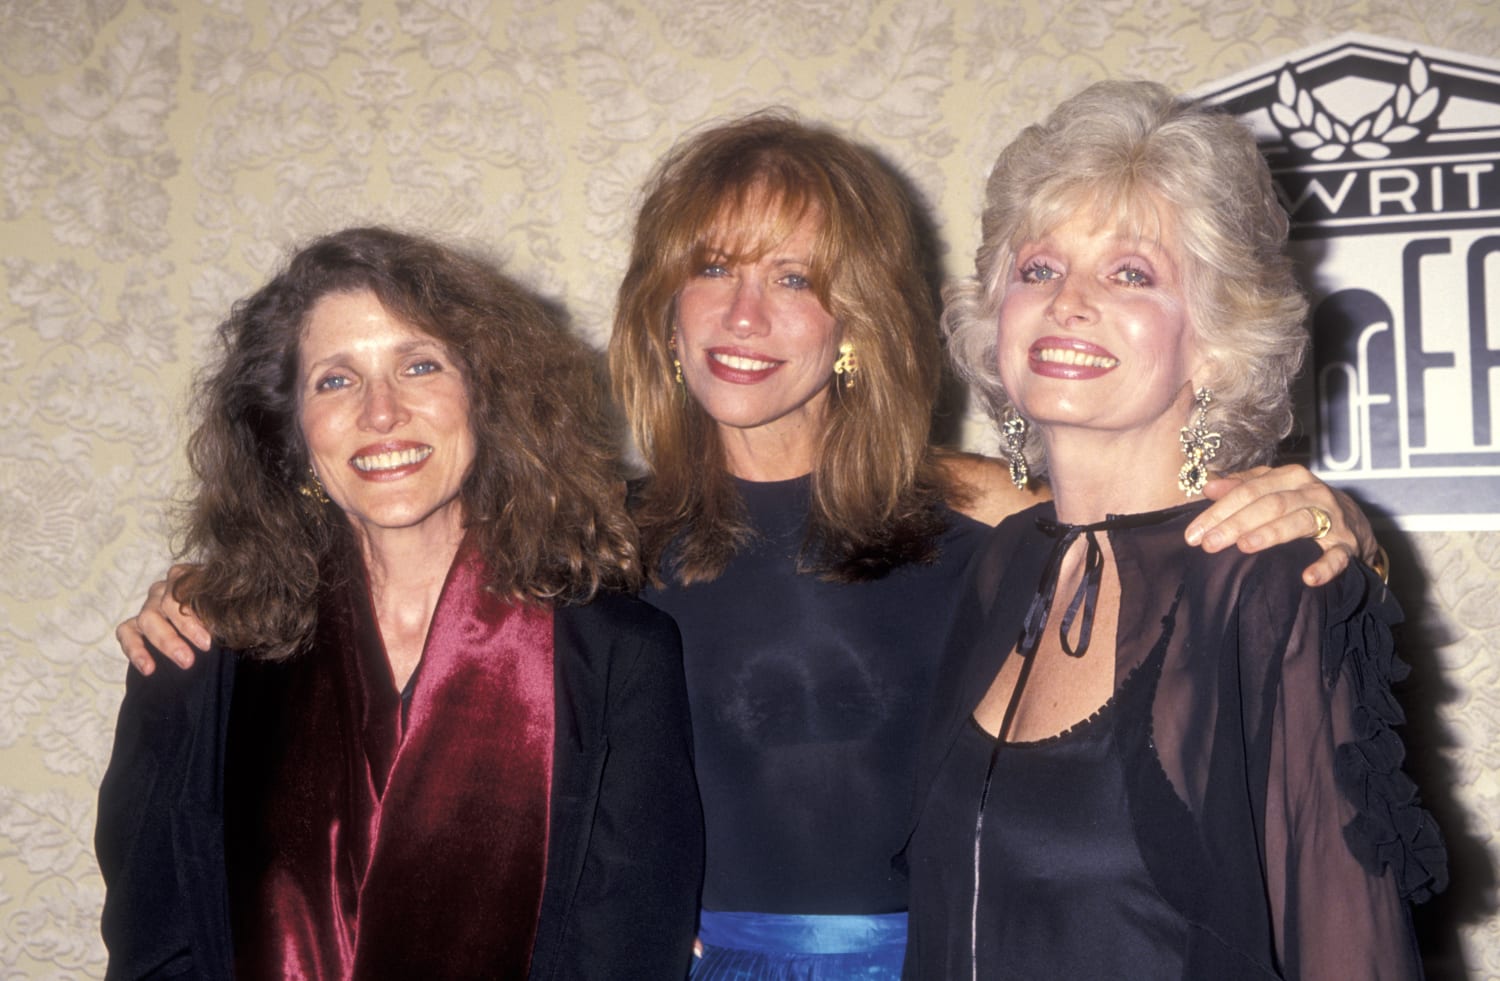 Carly Simon honors her sisters Joanna, Lucy in heartbreaking statement